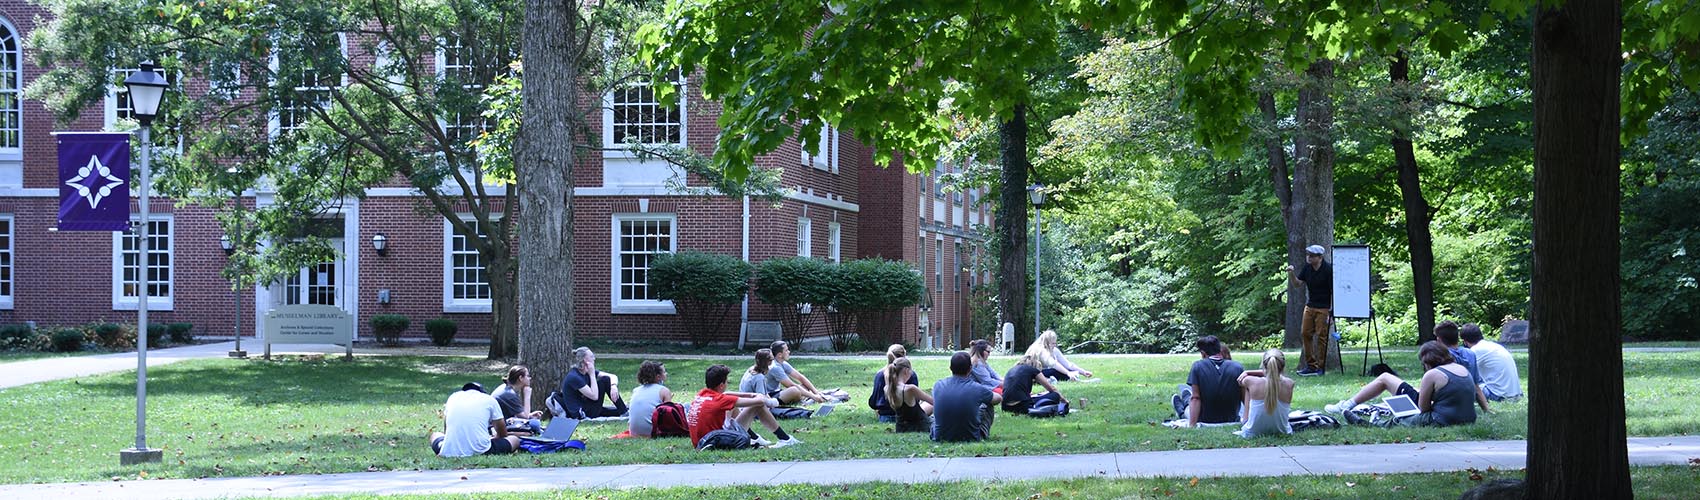 College Hall lawn classroom